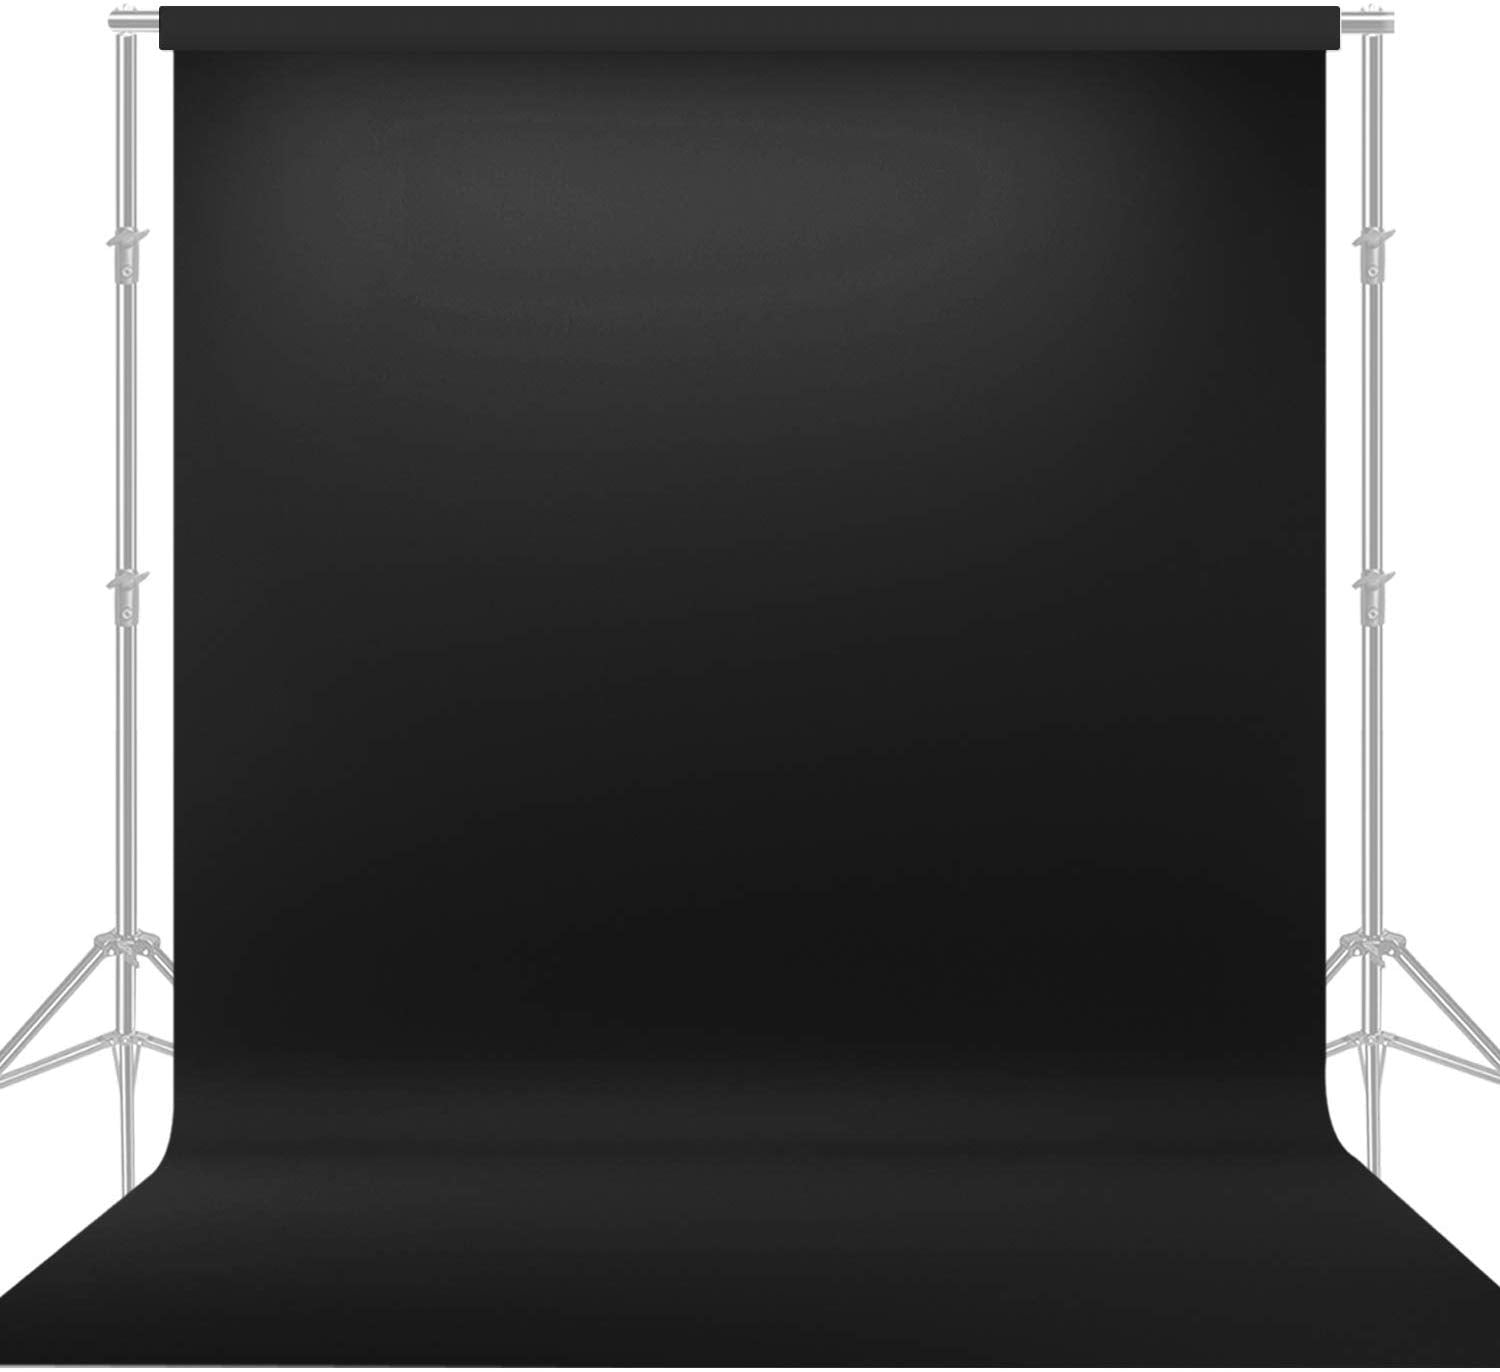 2836325 Black Studio Background Stock Photos Images  Photography   Shutterstock